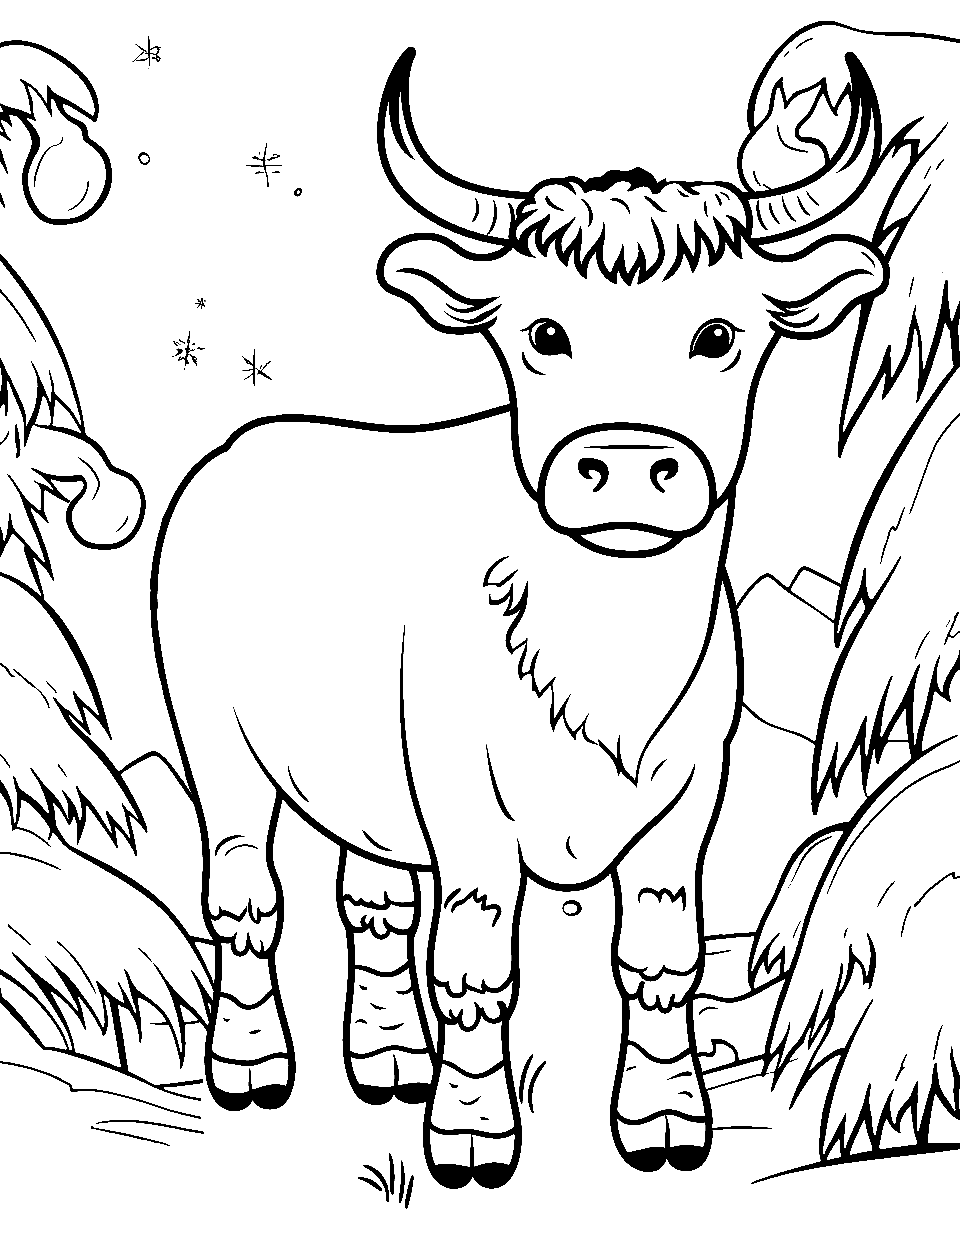 Warm and Woolly Coloring Page - A woolly cow, confidently situated in a sparse, cozy winter scene.